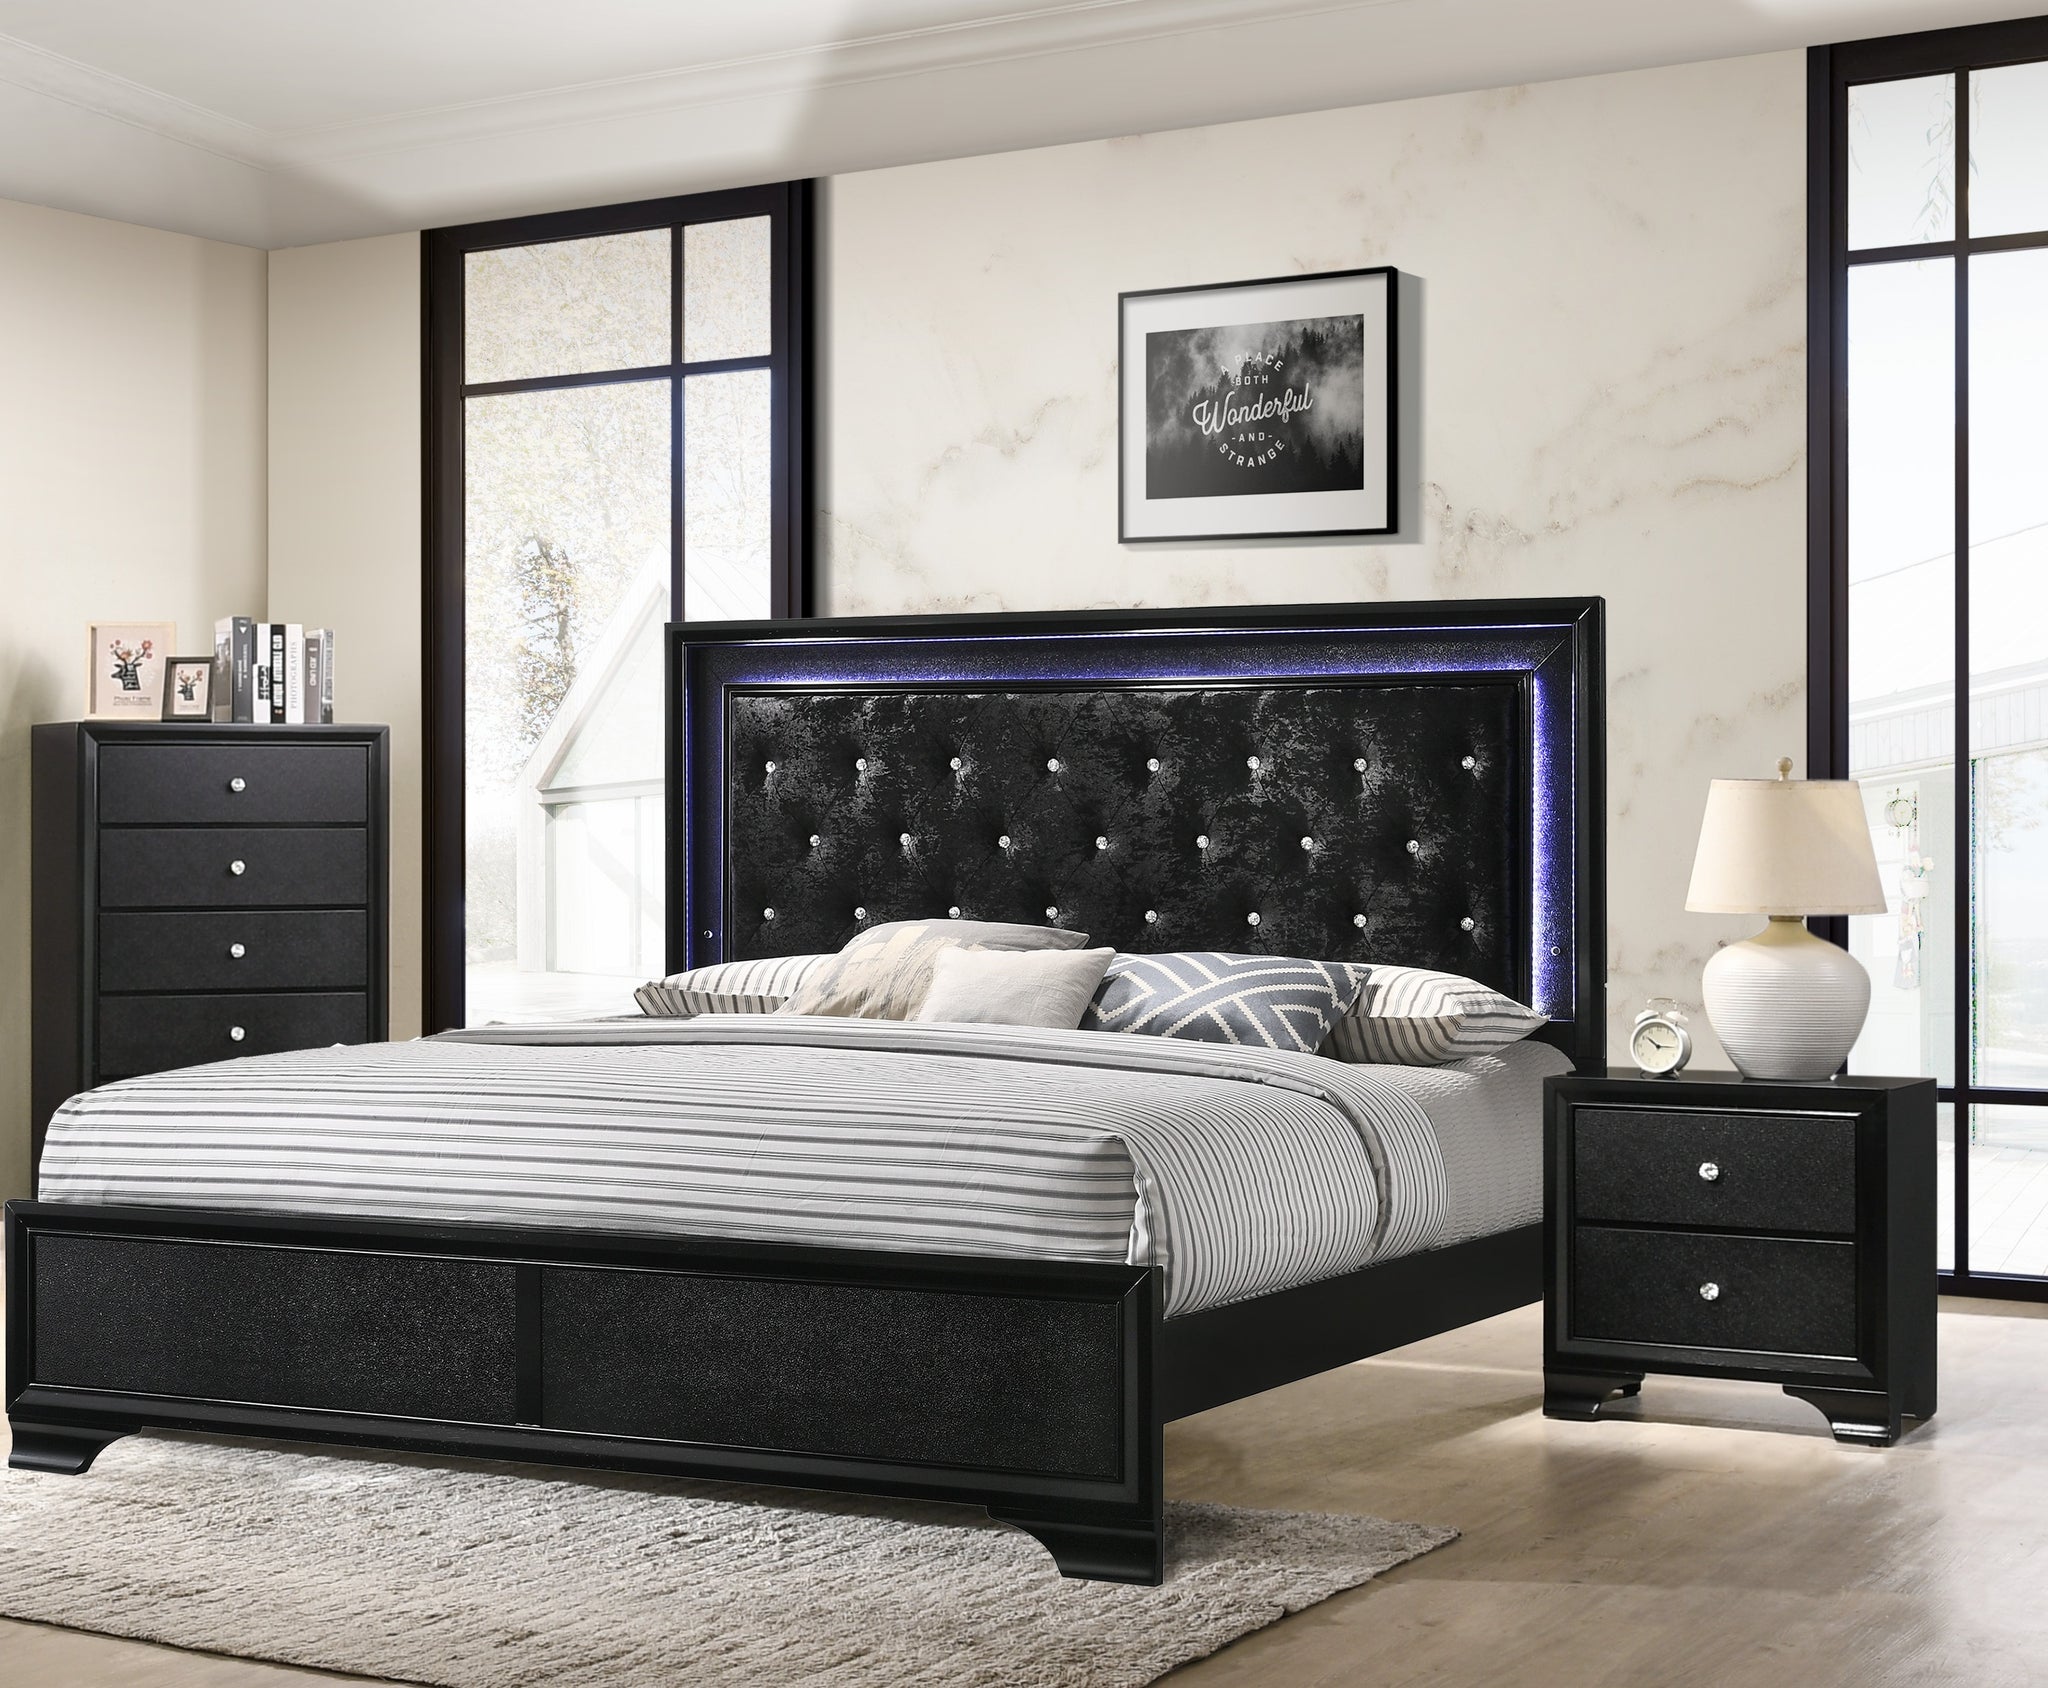 3 piece bedroom furniture cheap